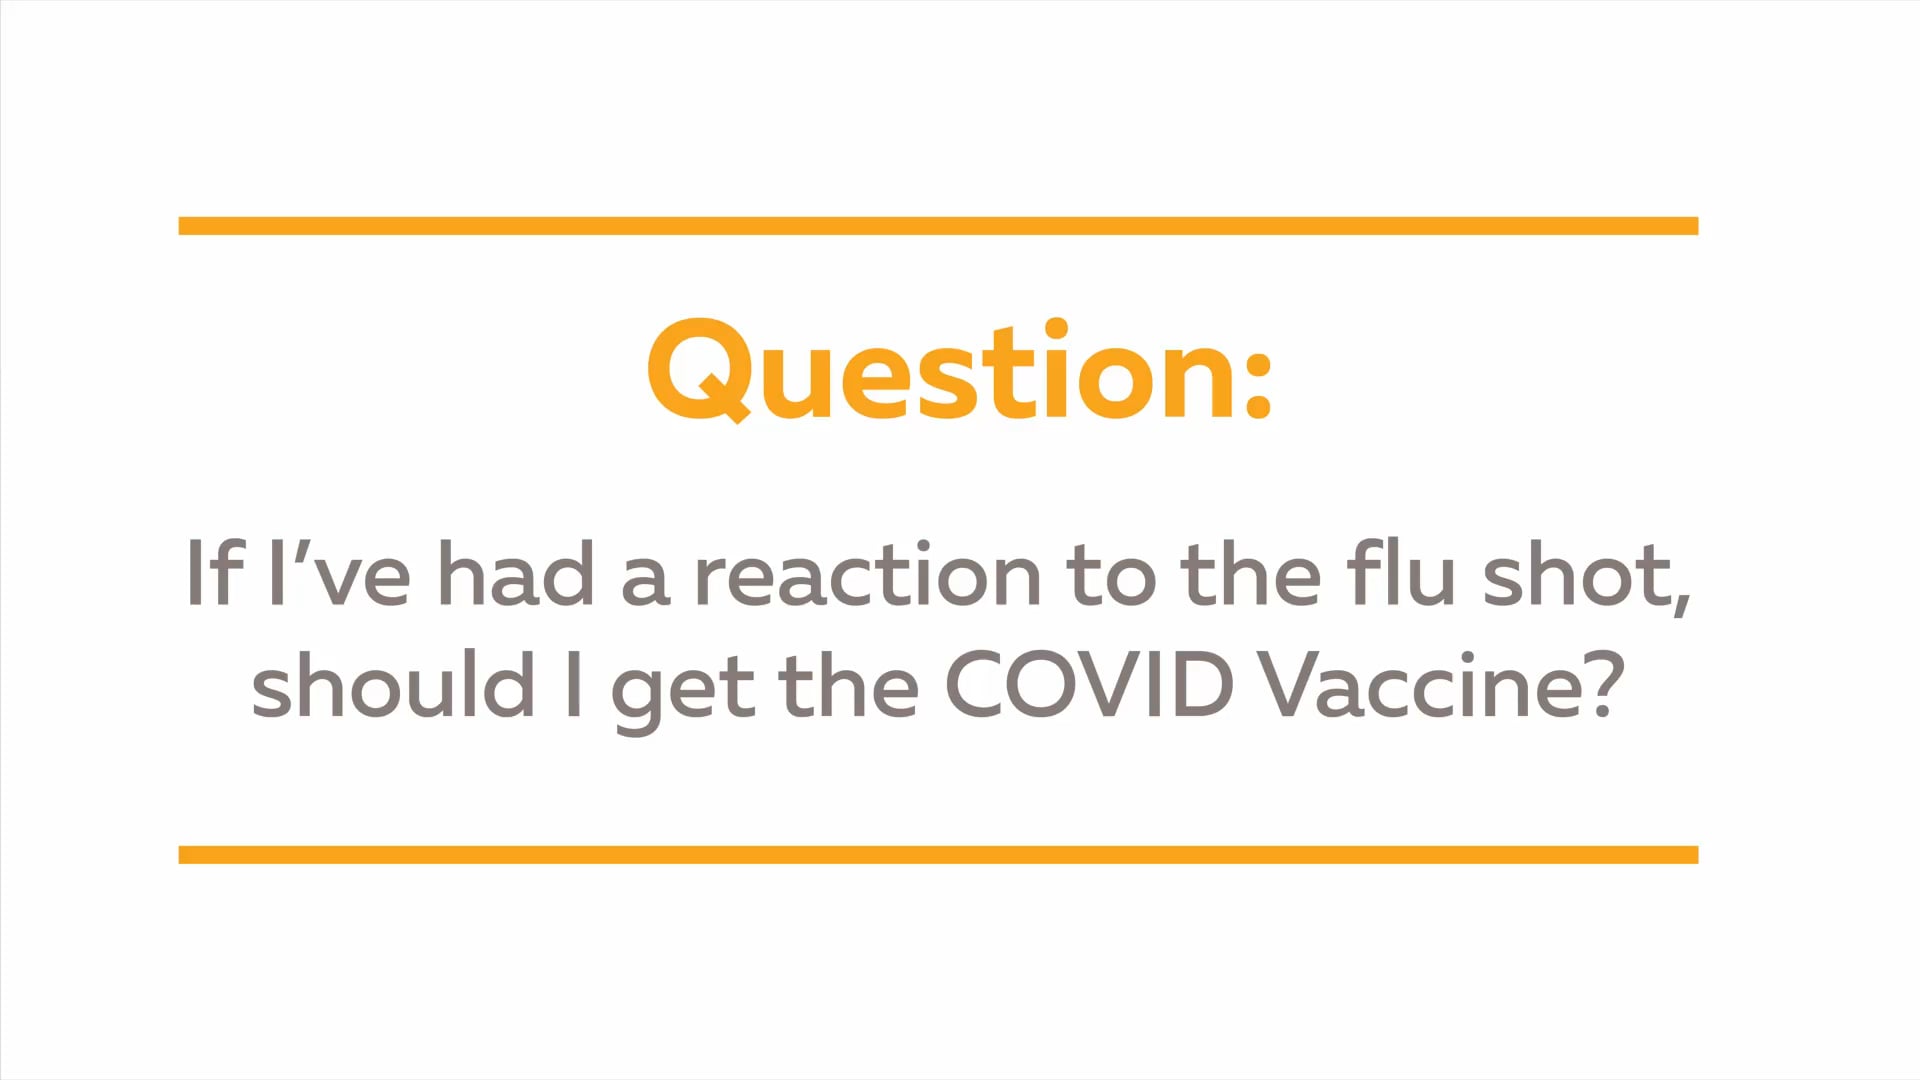 Vaccine Q&A: If I've had a reaction to the flu shot, should i get the COVID vaccine?